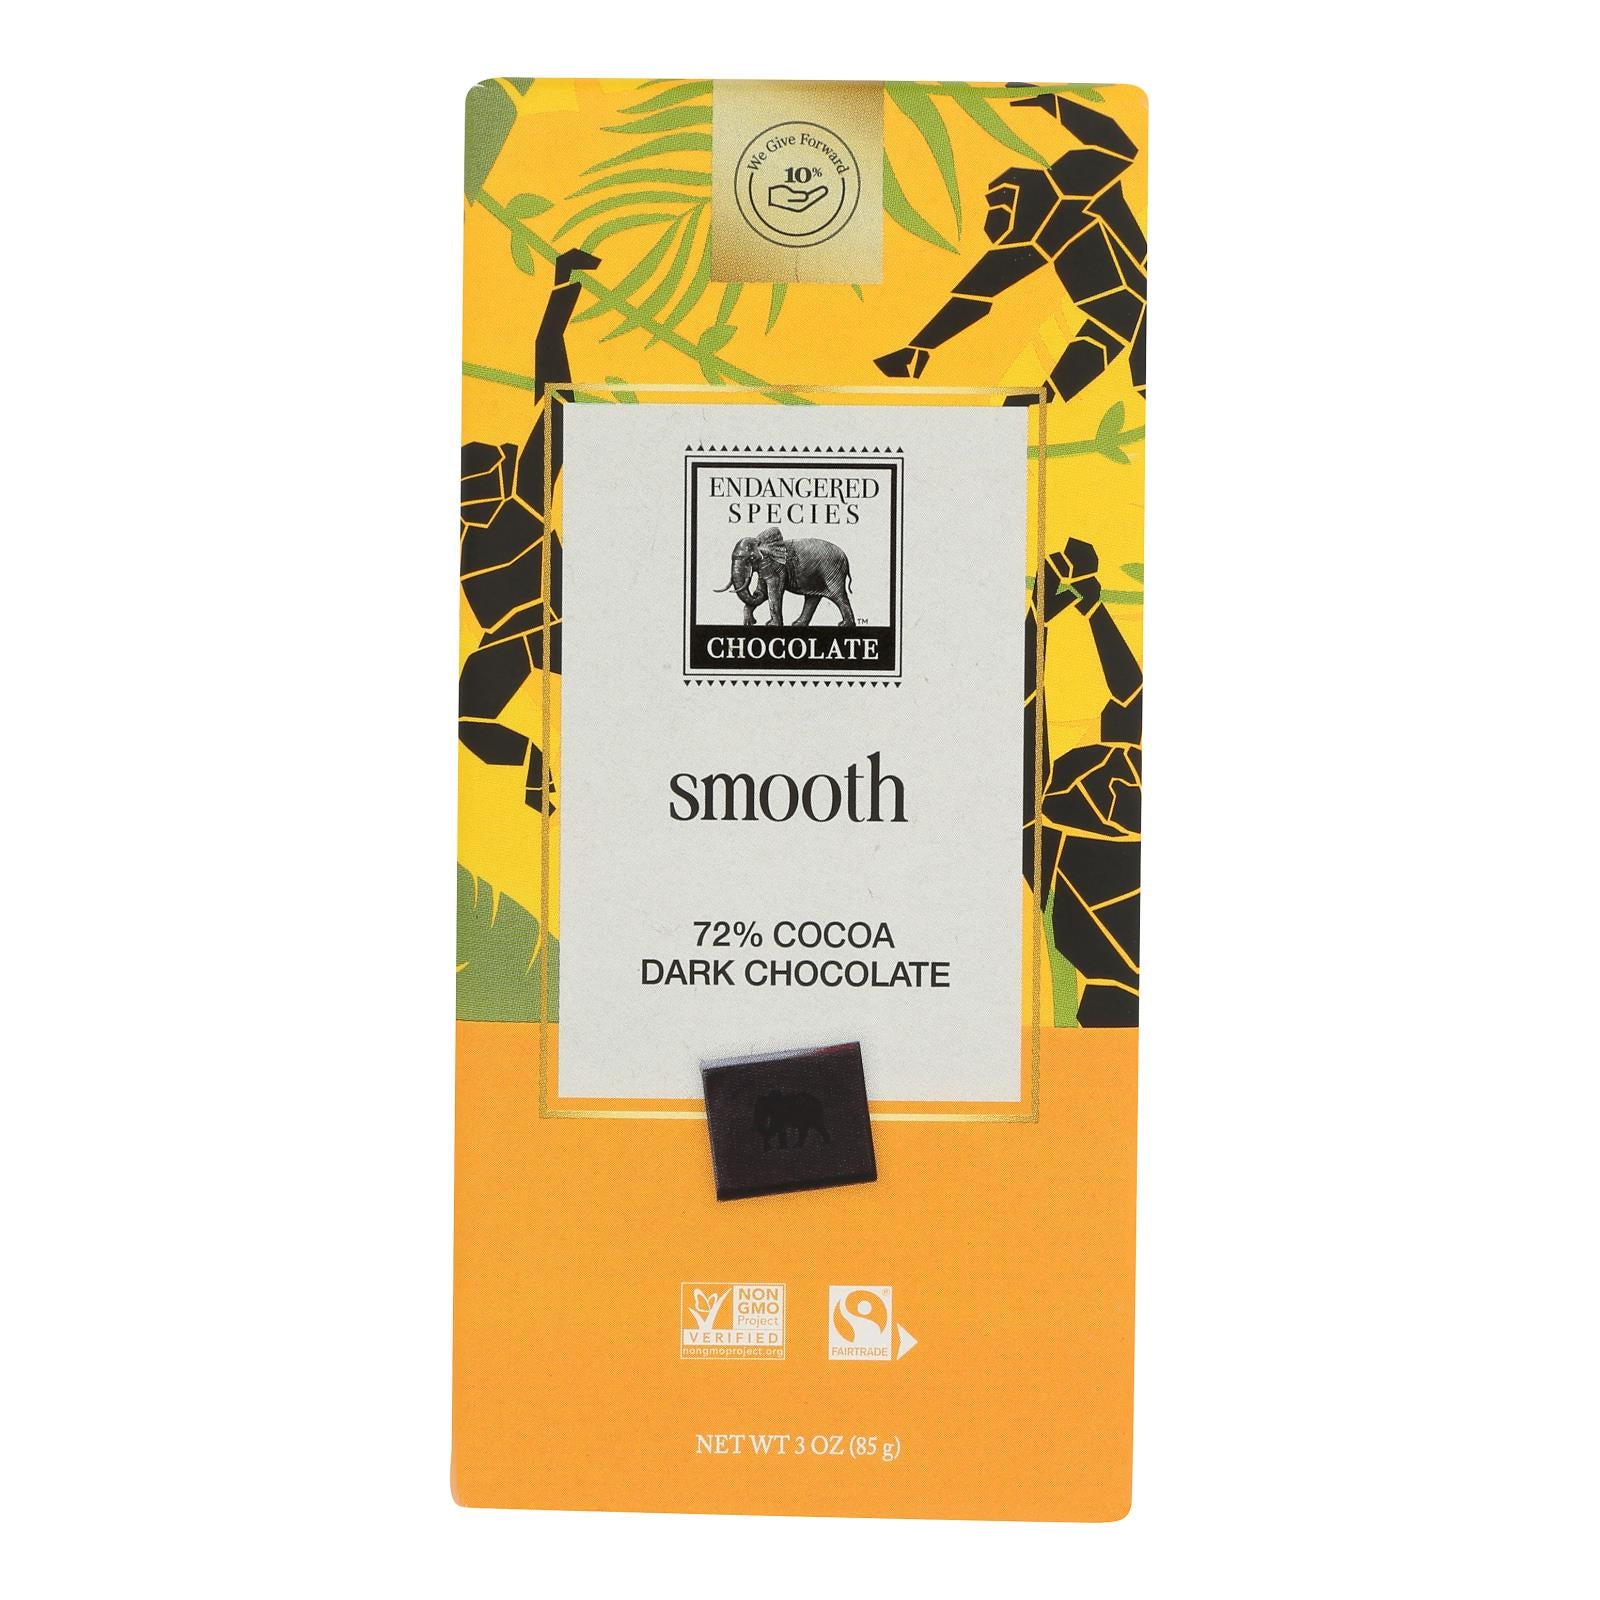 Endangered Species Natural Chocolate Bars - Dark Chocolate - 72 Percent Cocoa - 3 oz Bars - Case of 12